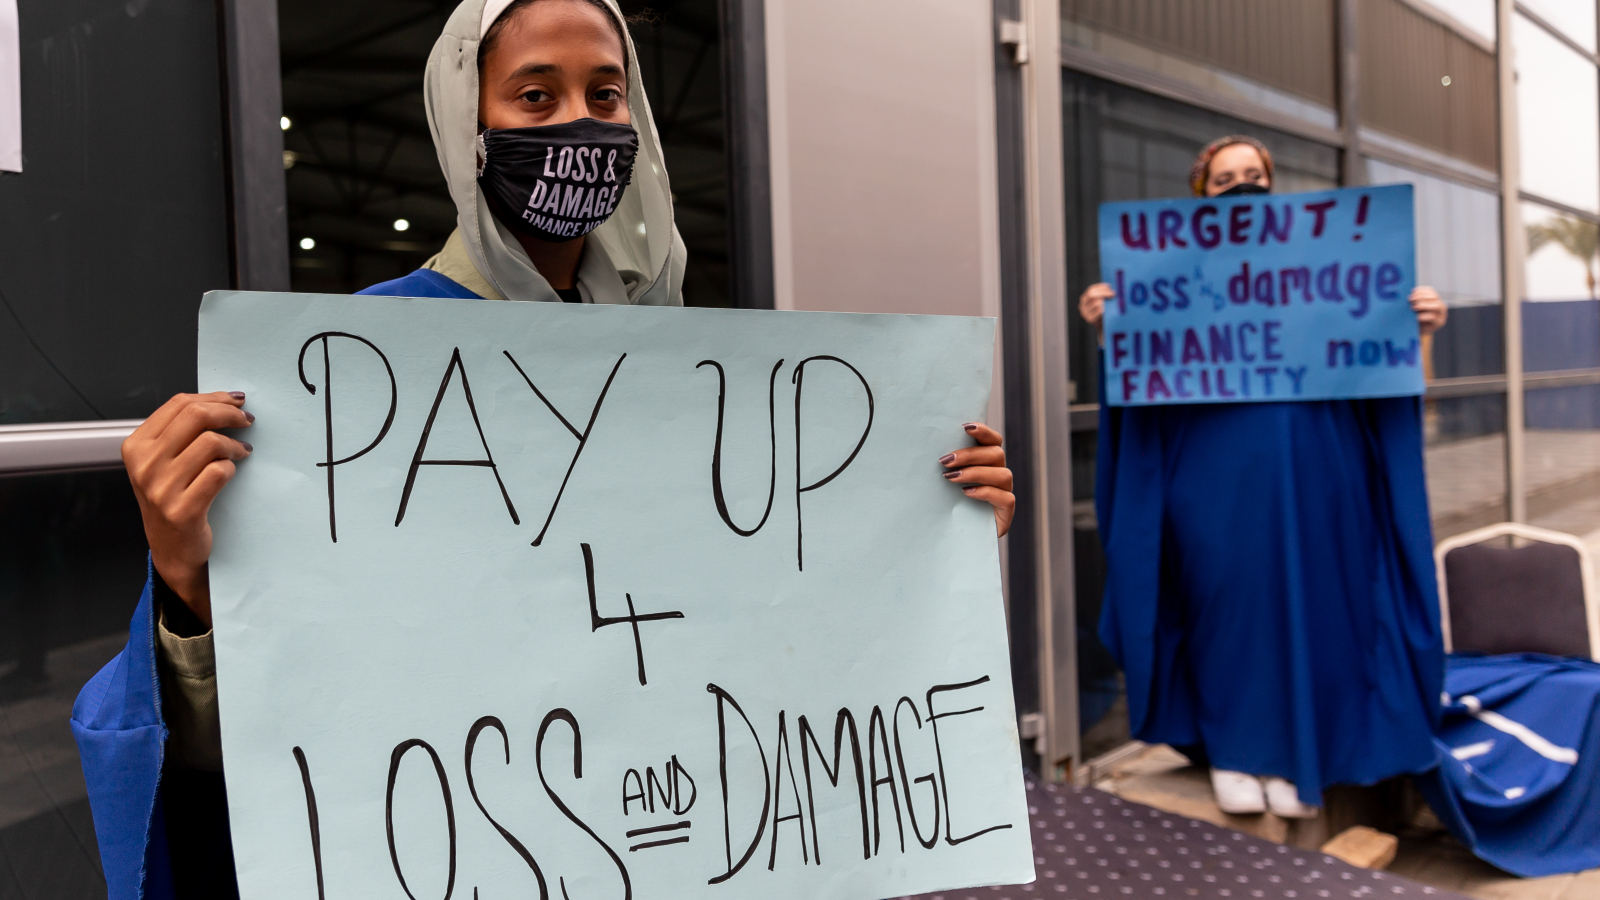 Women activists protest and demand a Loss and Damage fund during the COP27 UN Climate Change Conference, held by UNFCCC in Sharm El-Sheikh International Convention Center, Egypt on November 17, 2022.